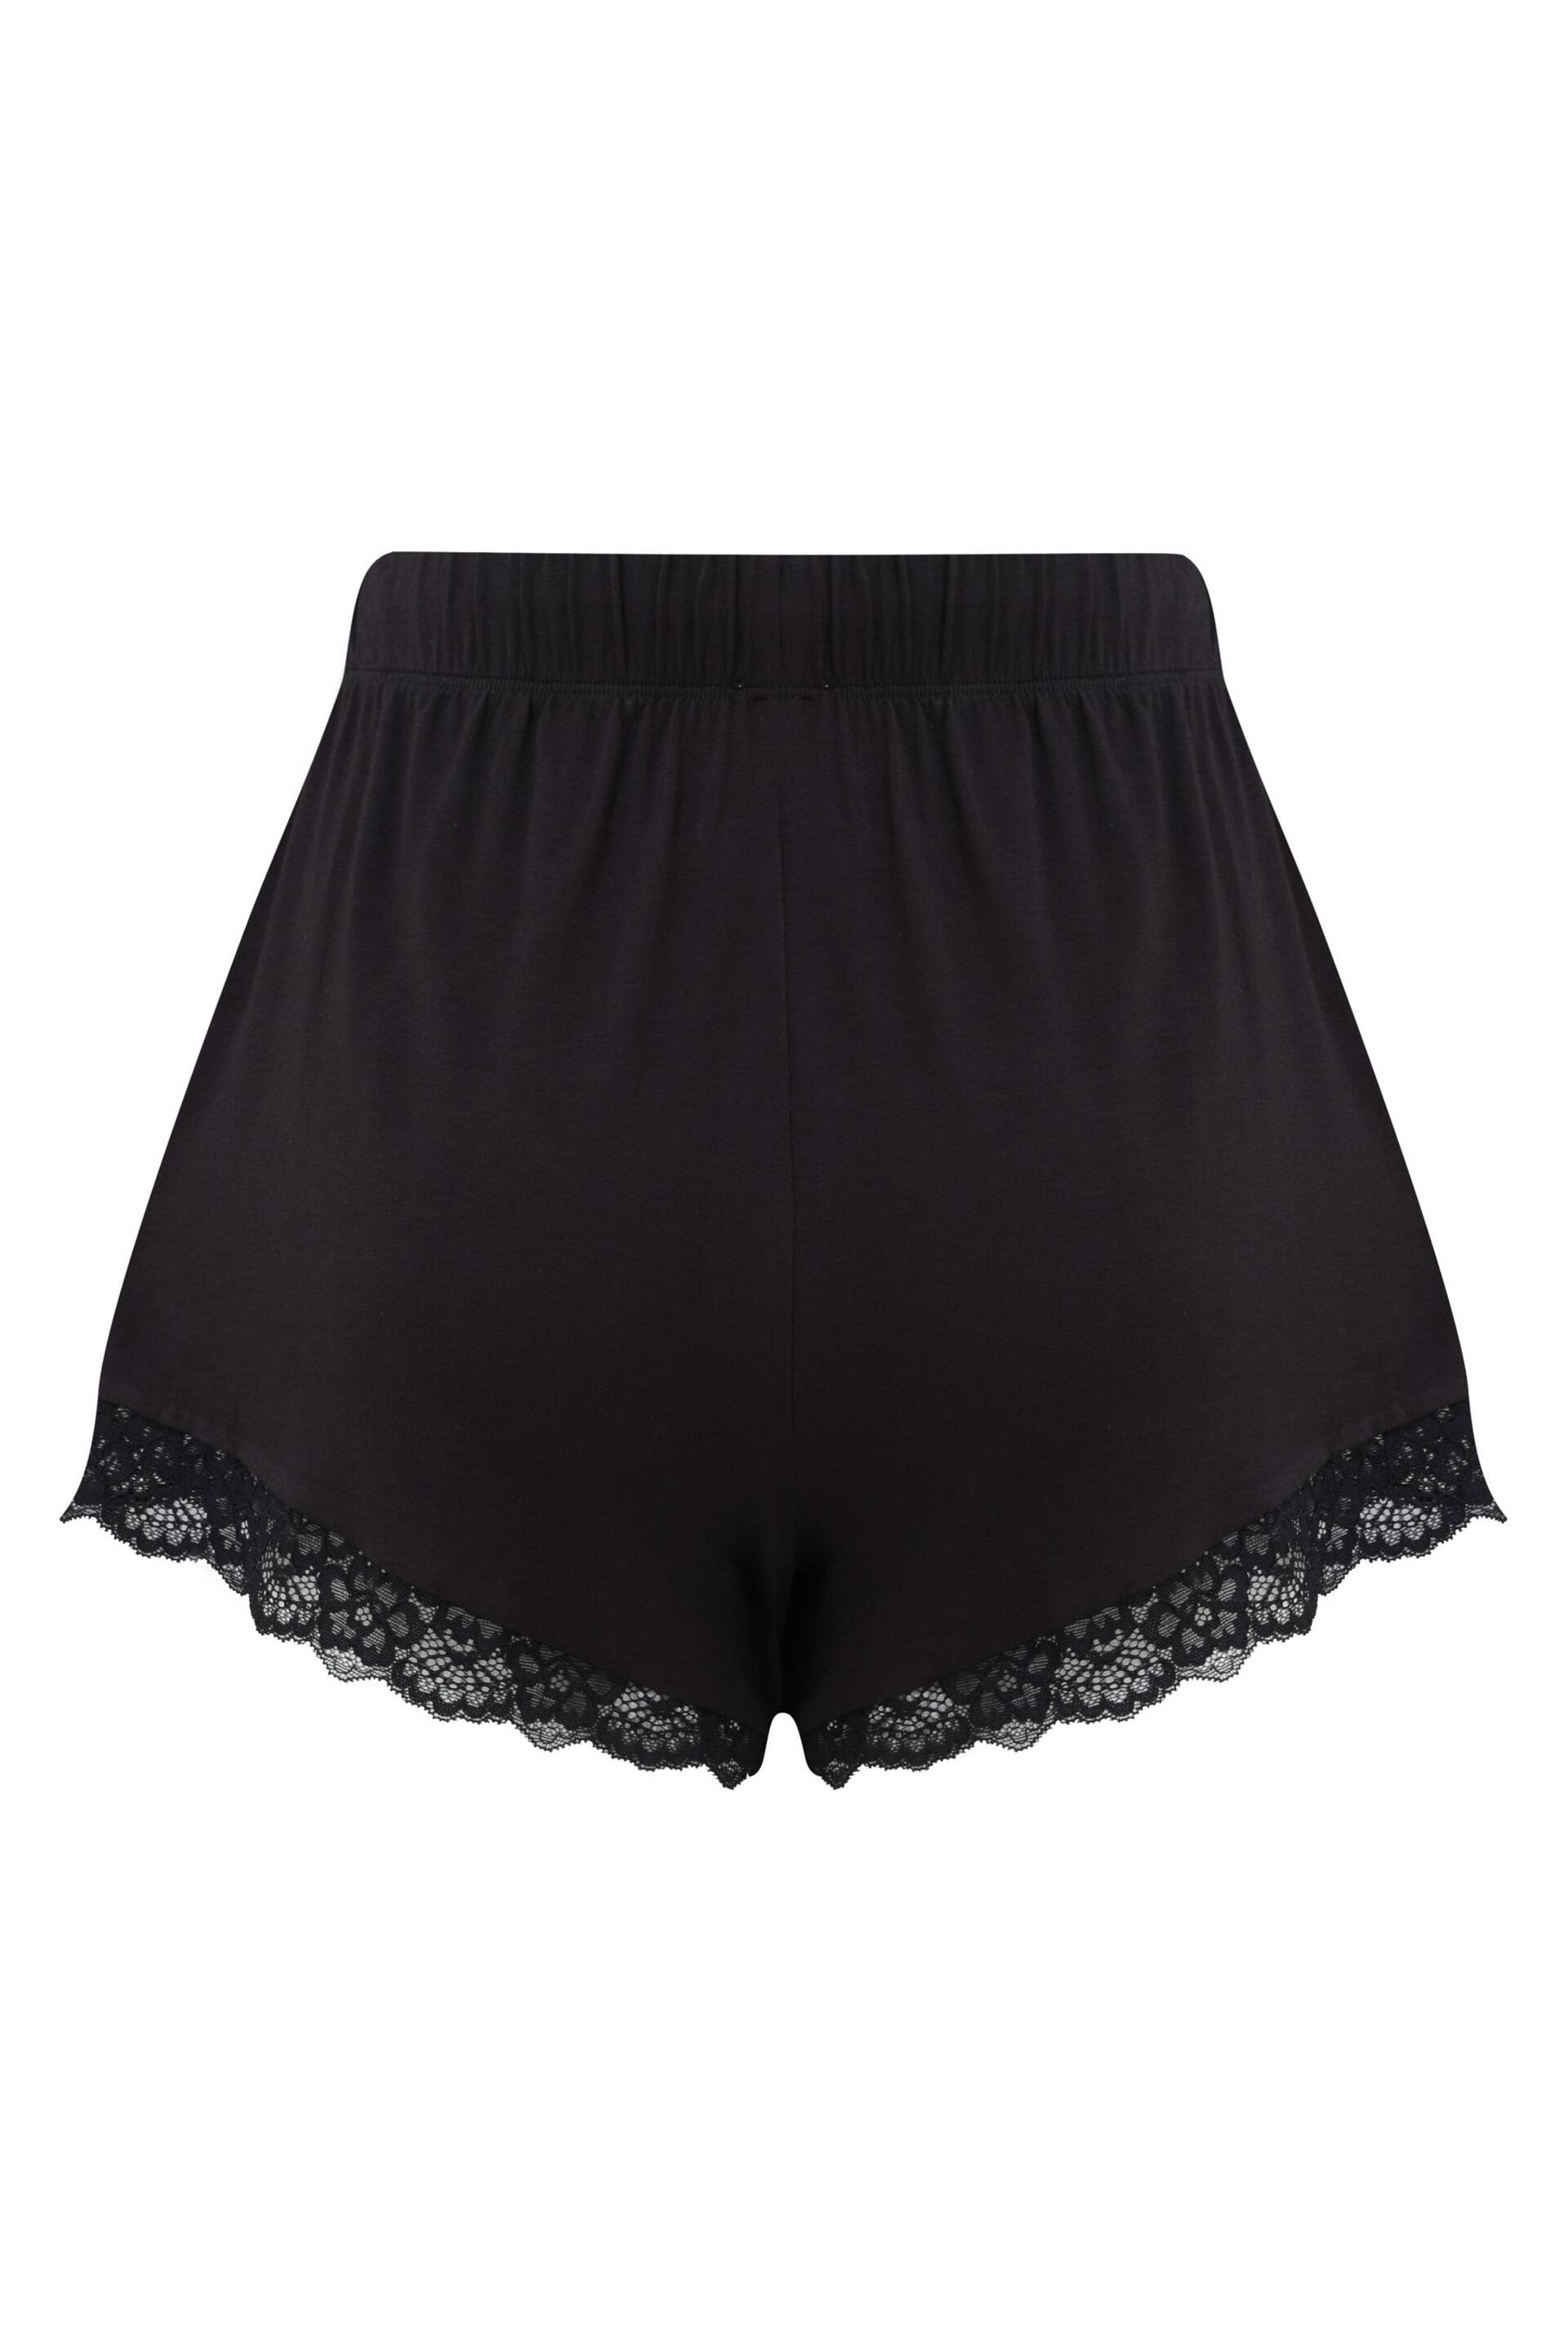 Pour Moi Black Sofa Loves Lace Soft Jersey Shorts - Image 4 of 9